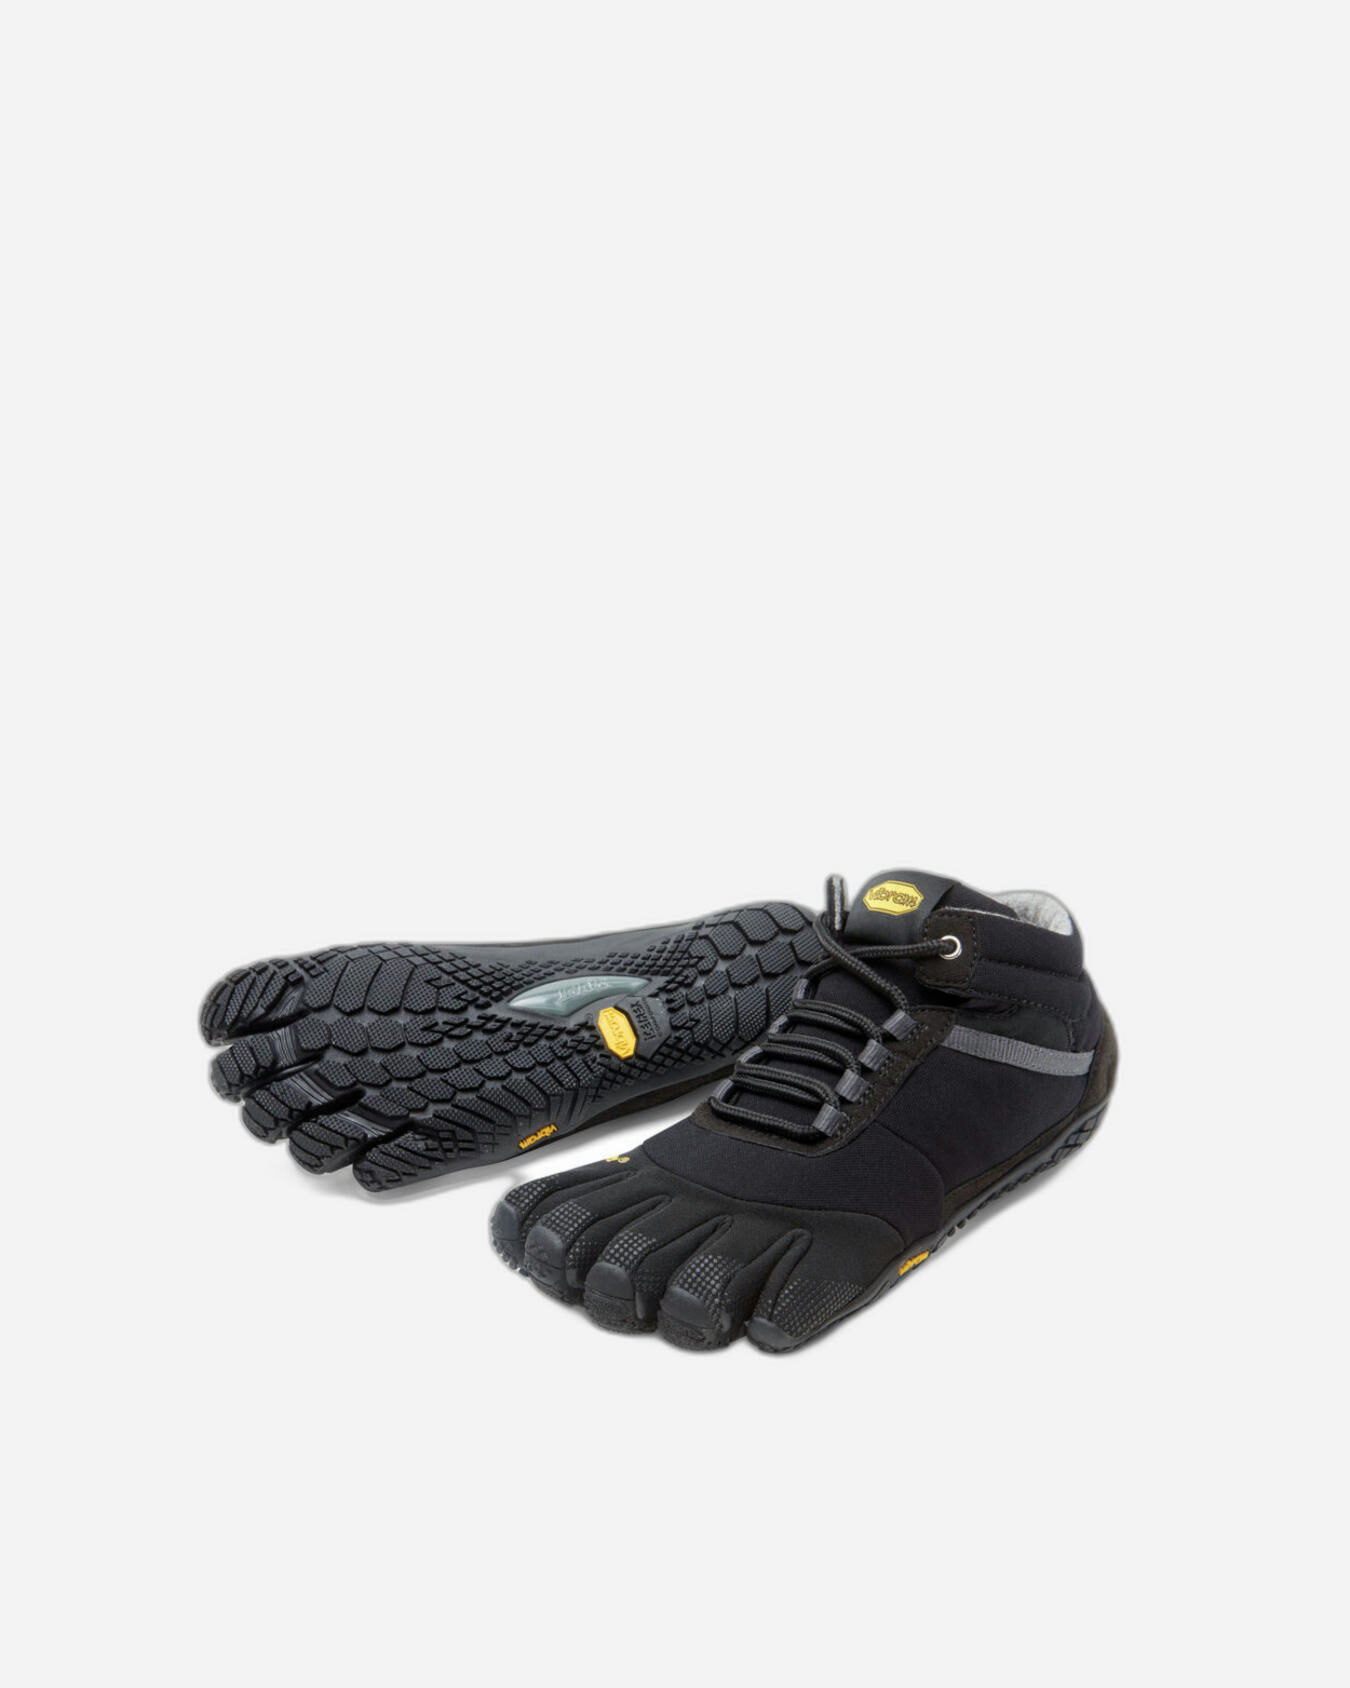 vibram five finger boots for cold weather